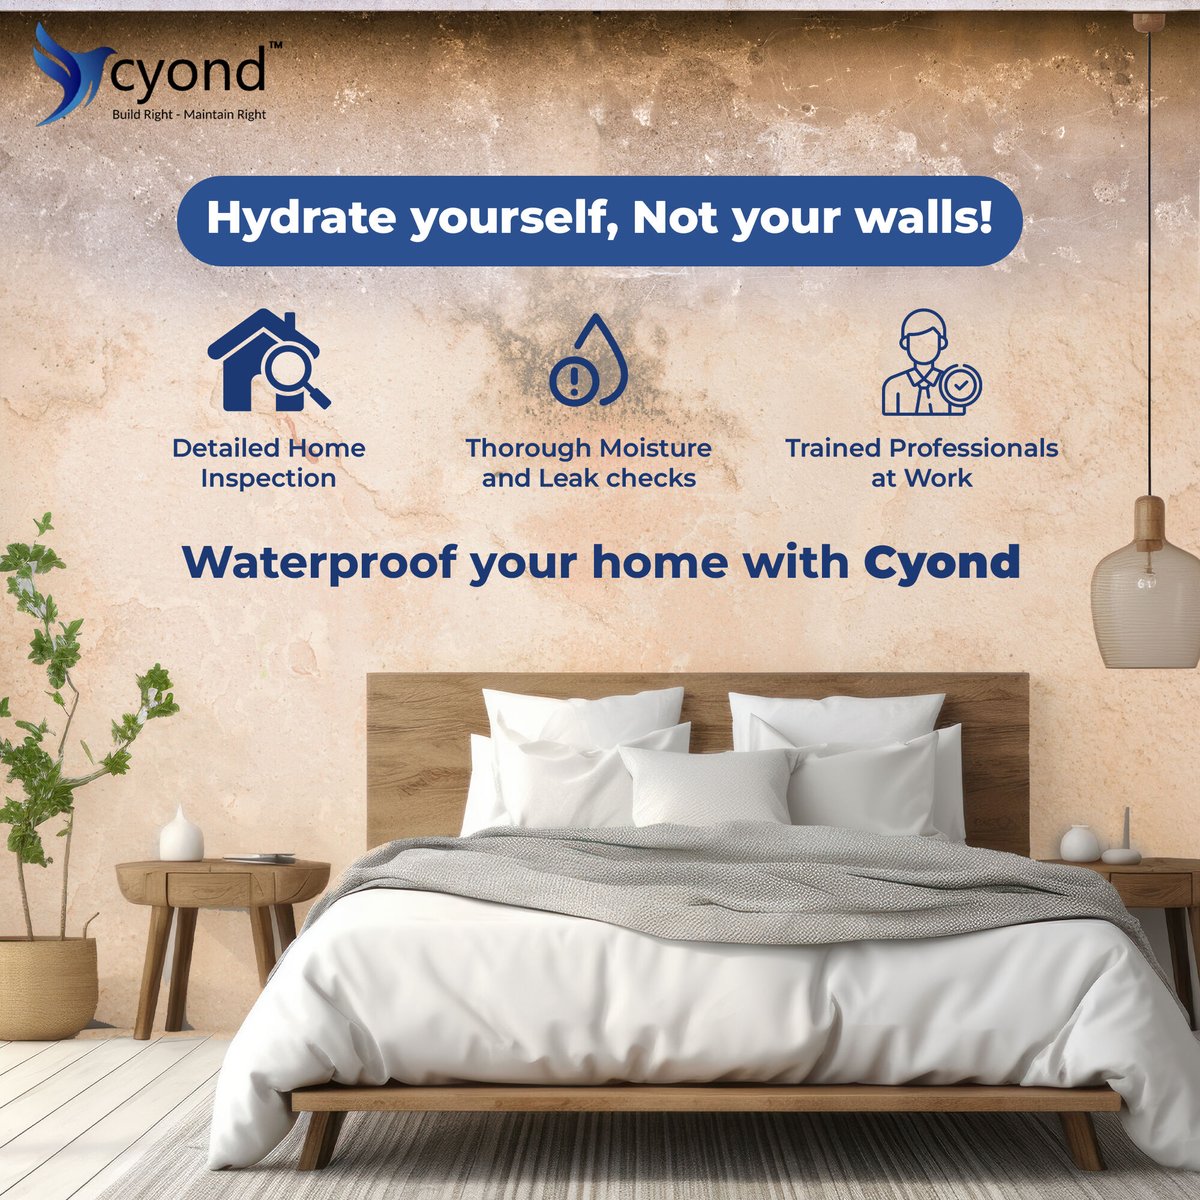 Hydrate your thirst, not your walls! Stay Dry & Fly High with Cyond, the ultimate waterproofing solution for your home. Protect your home from leaks and dampness. Say goodbye to worries and hello to a dry, worry-free home!
.
.
.
#cyond #protectyourhome #rain #raindrop #sm4dm